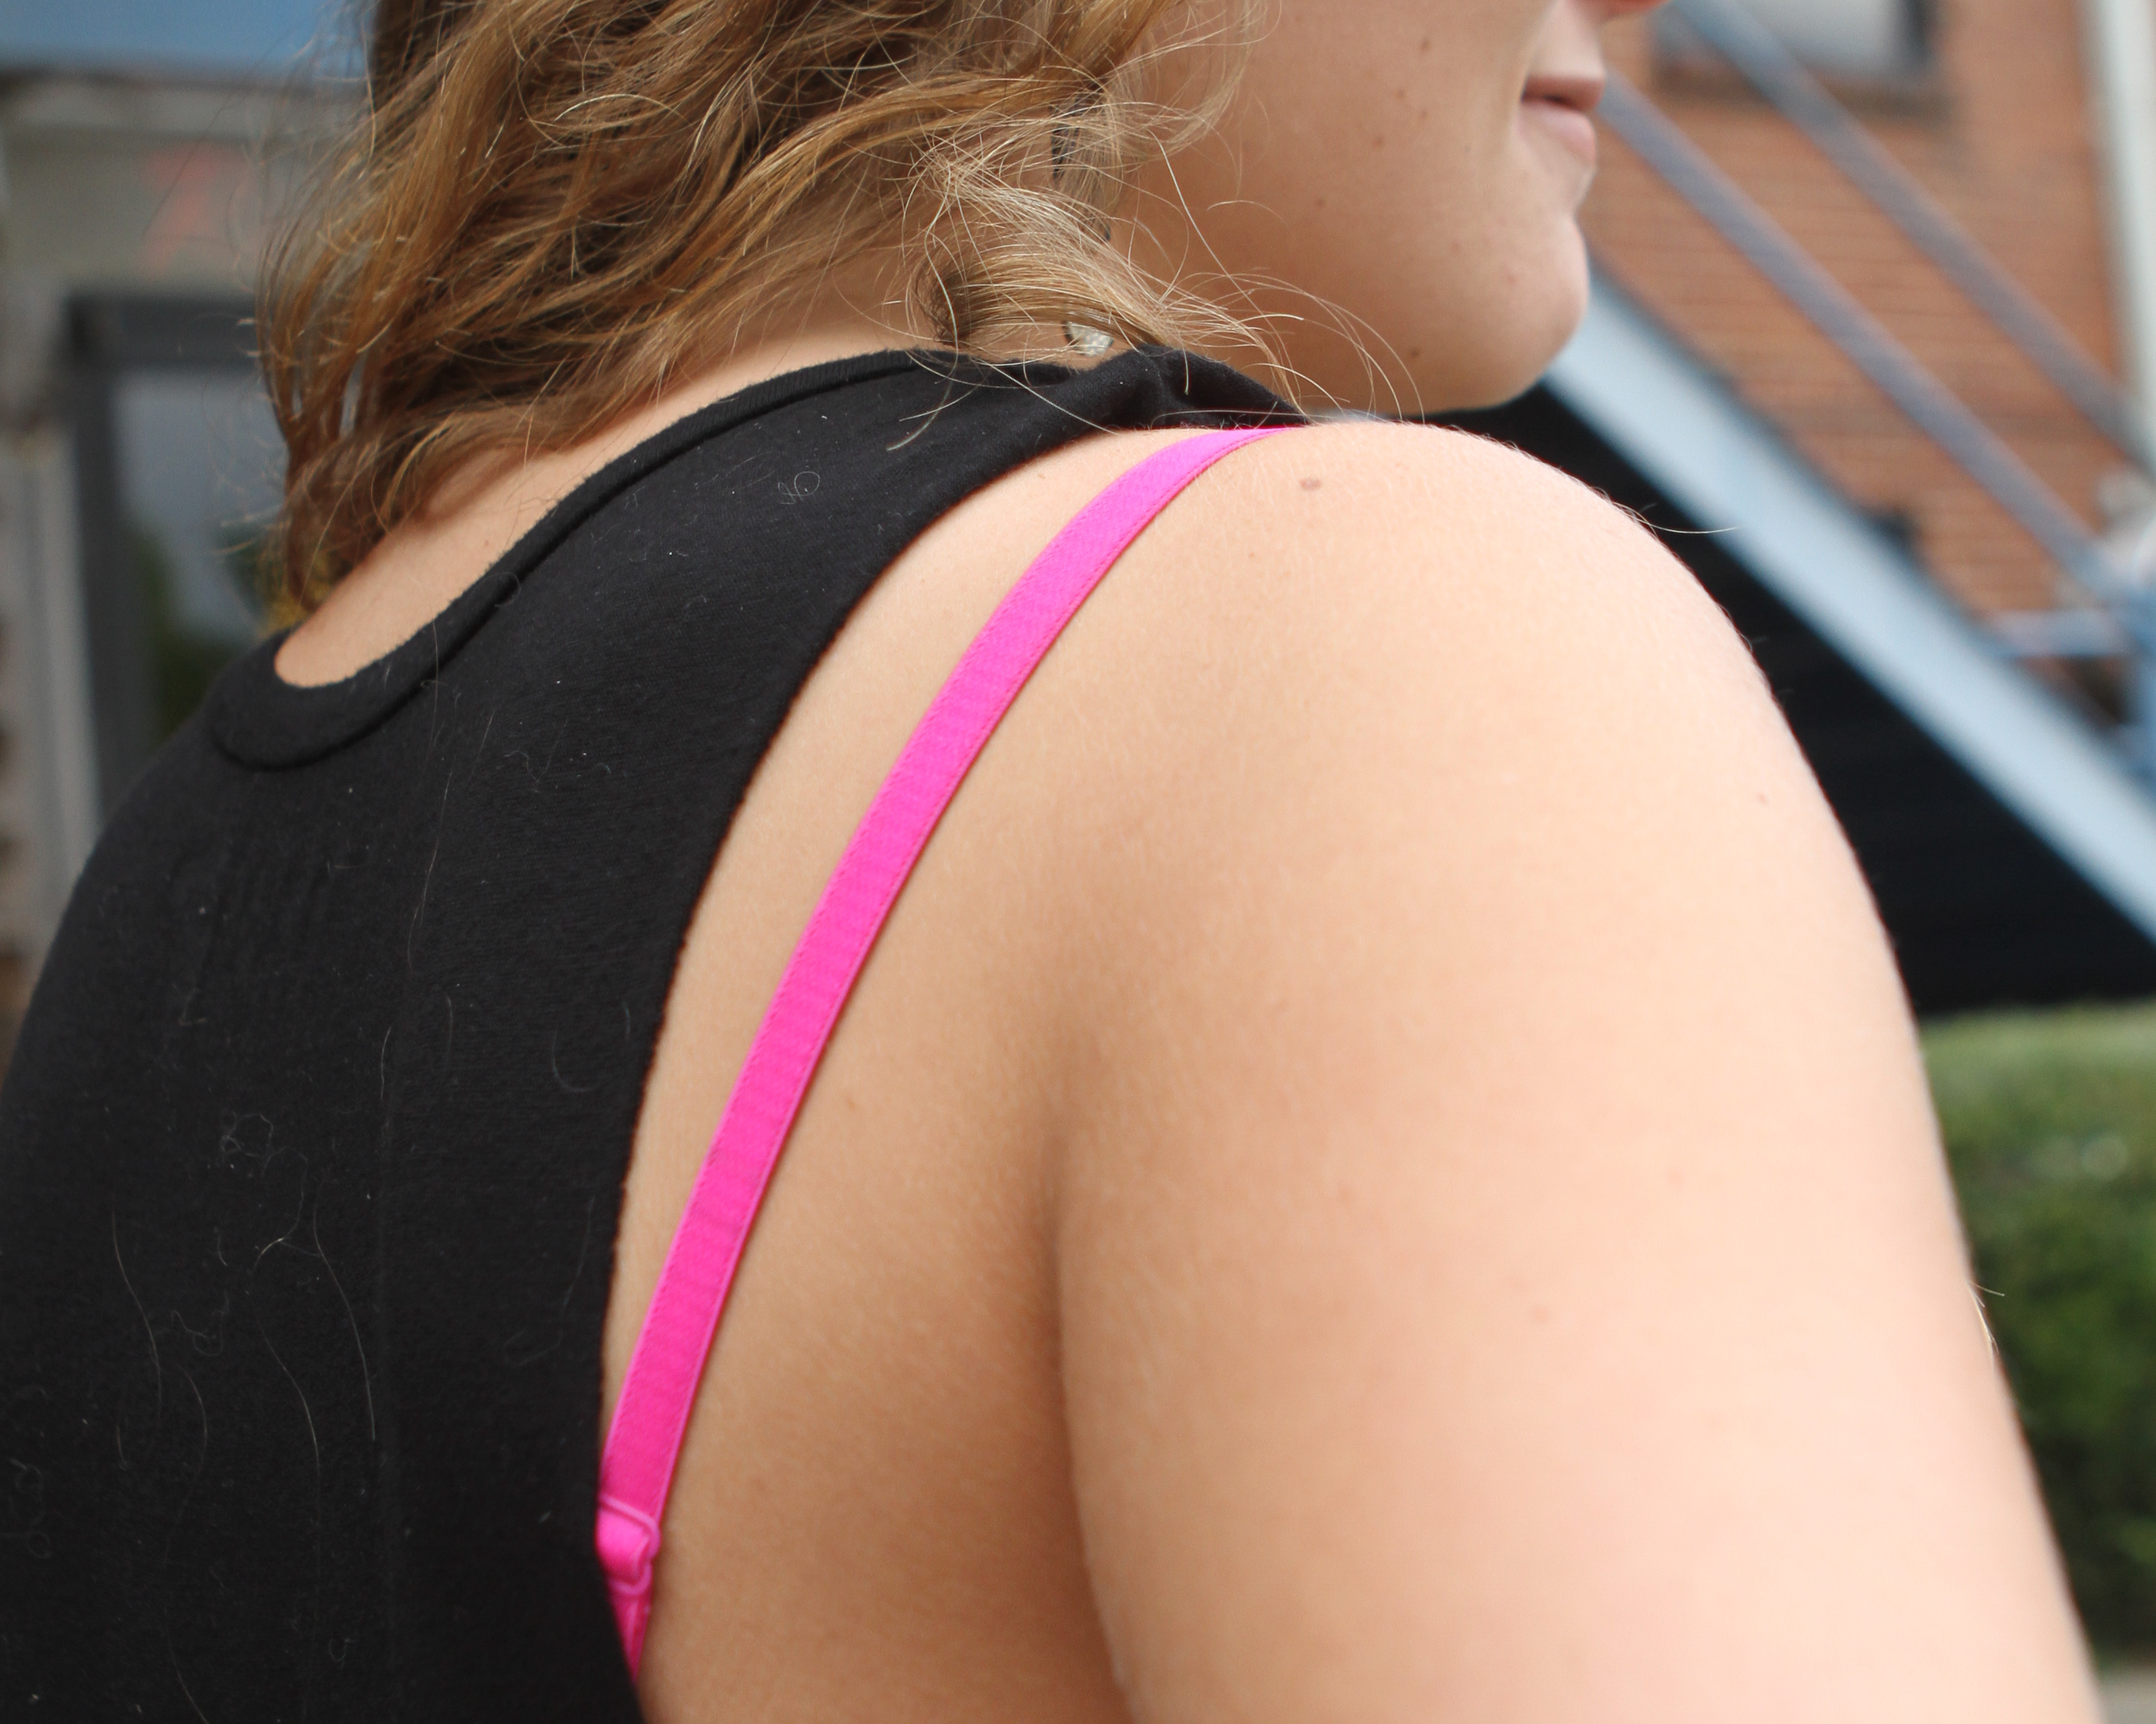 When will the visible bra strap just go away? - City